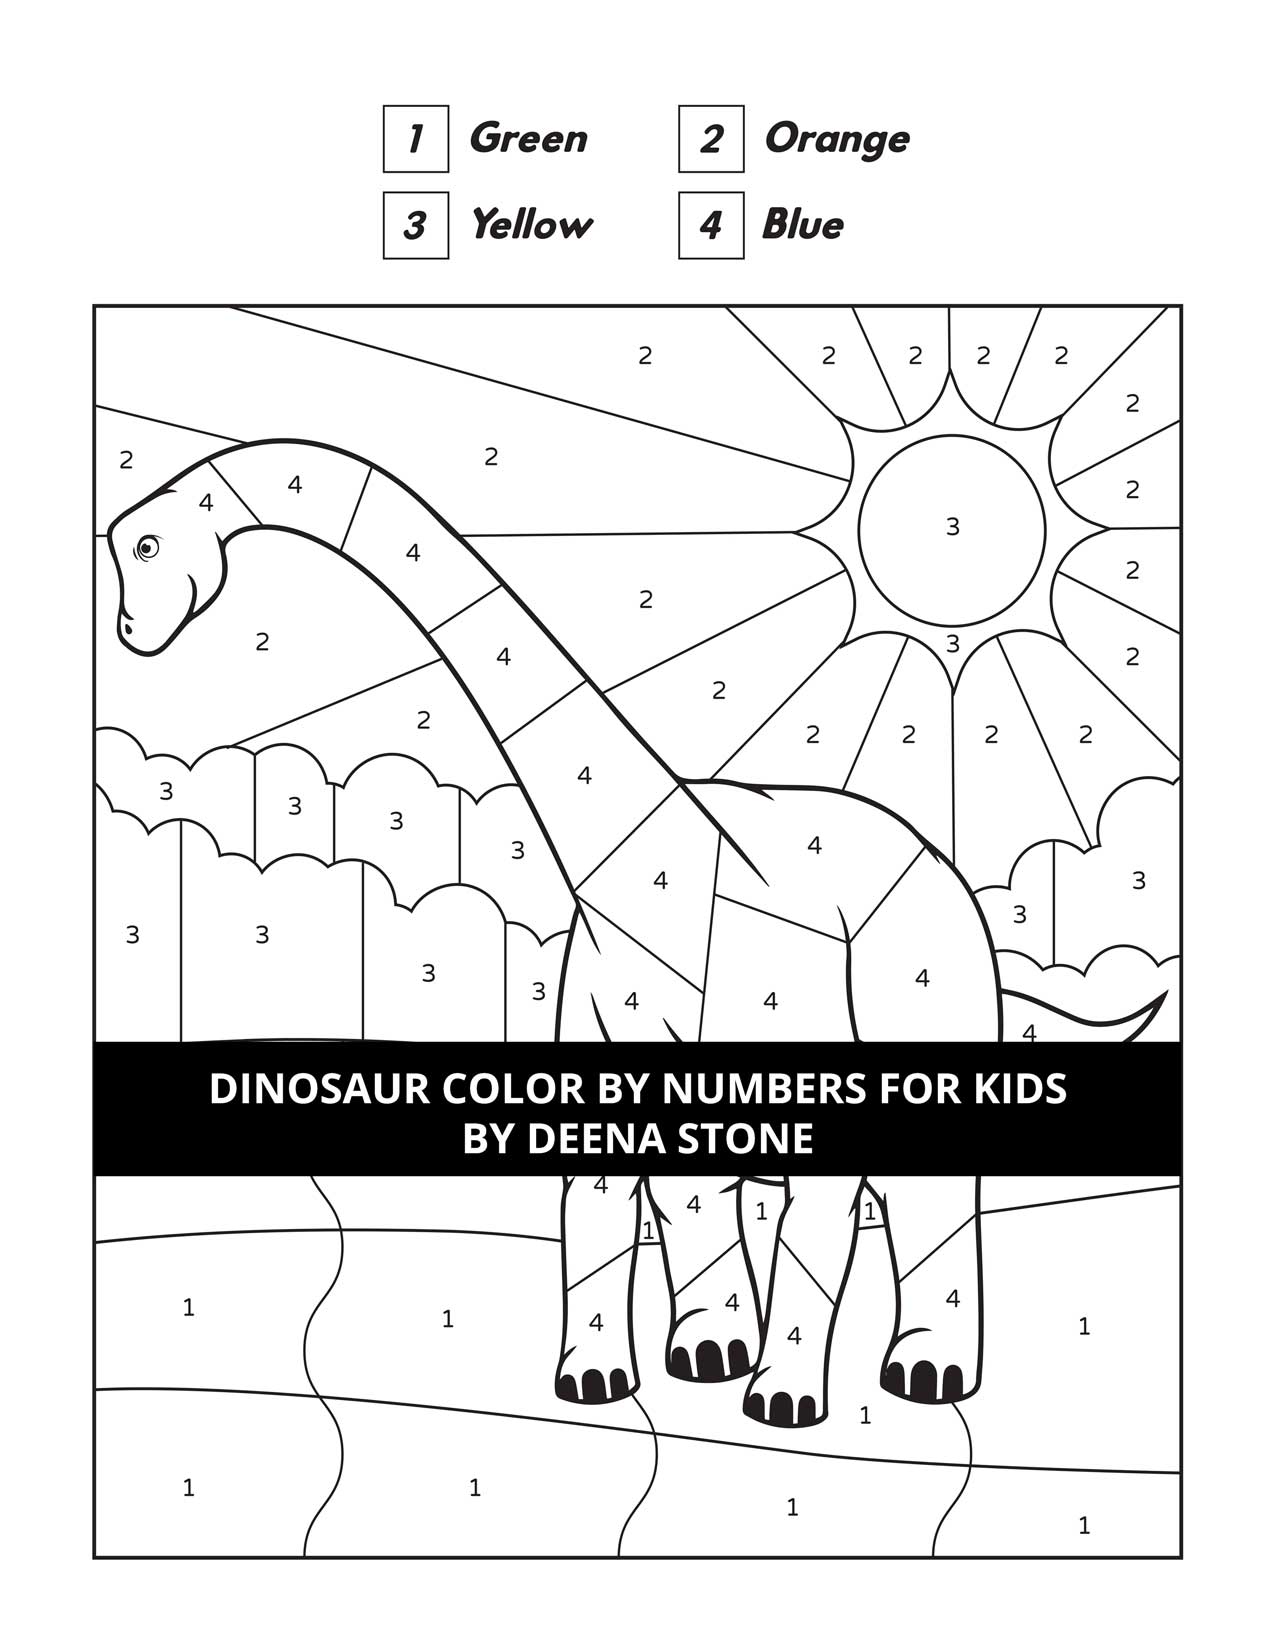 dinosaur-color-by-numbers-for-kids-deena-stone